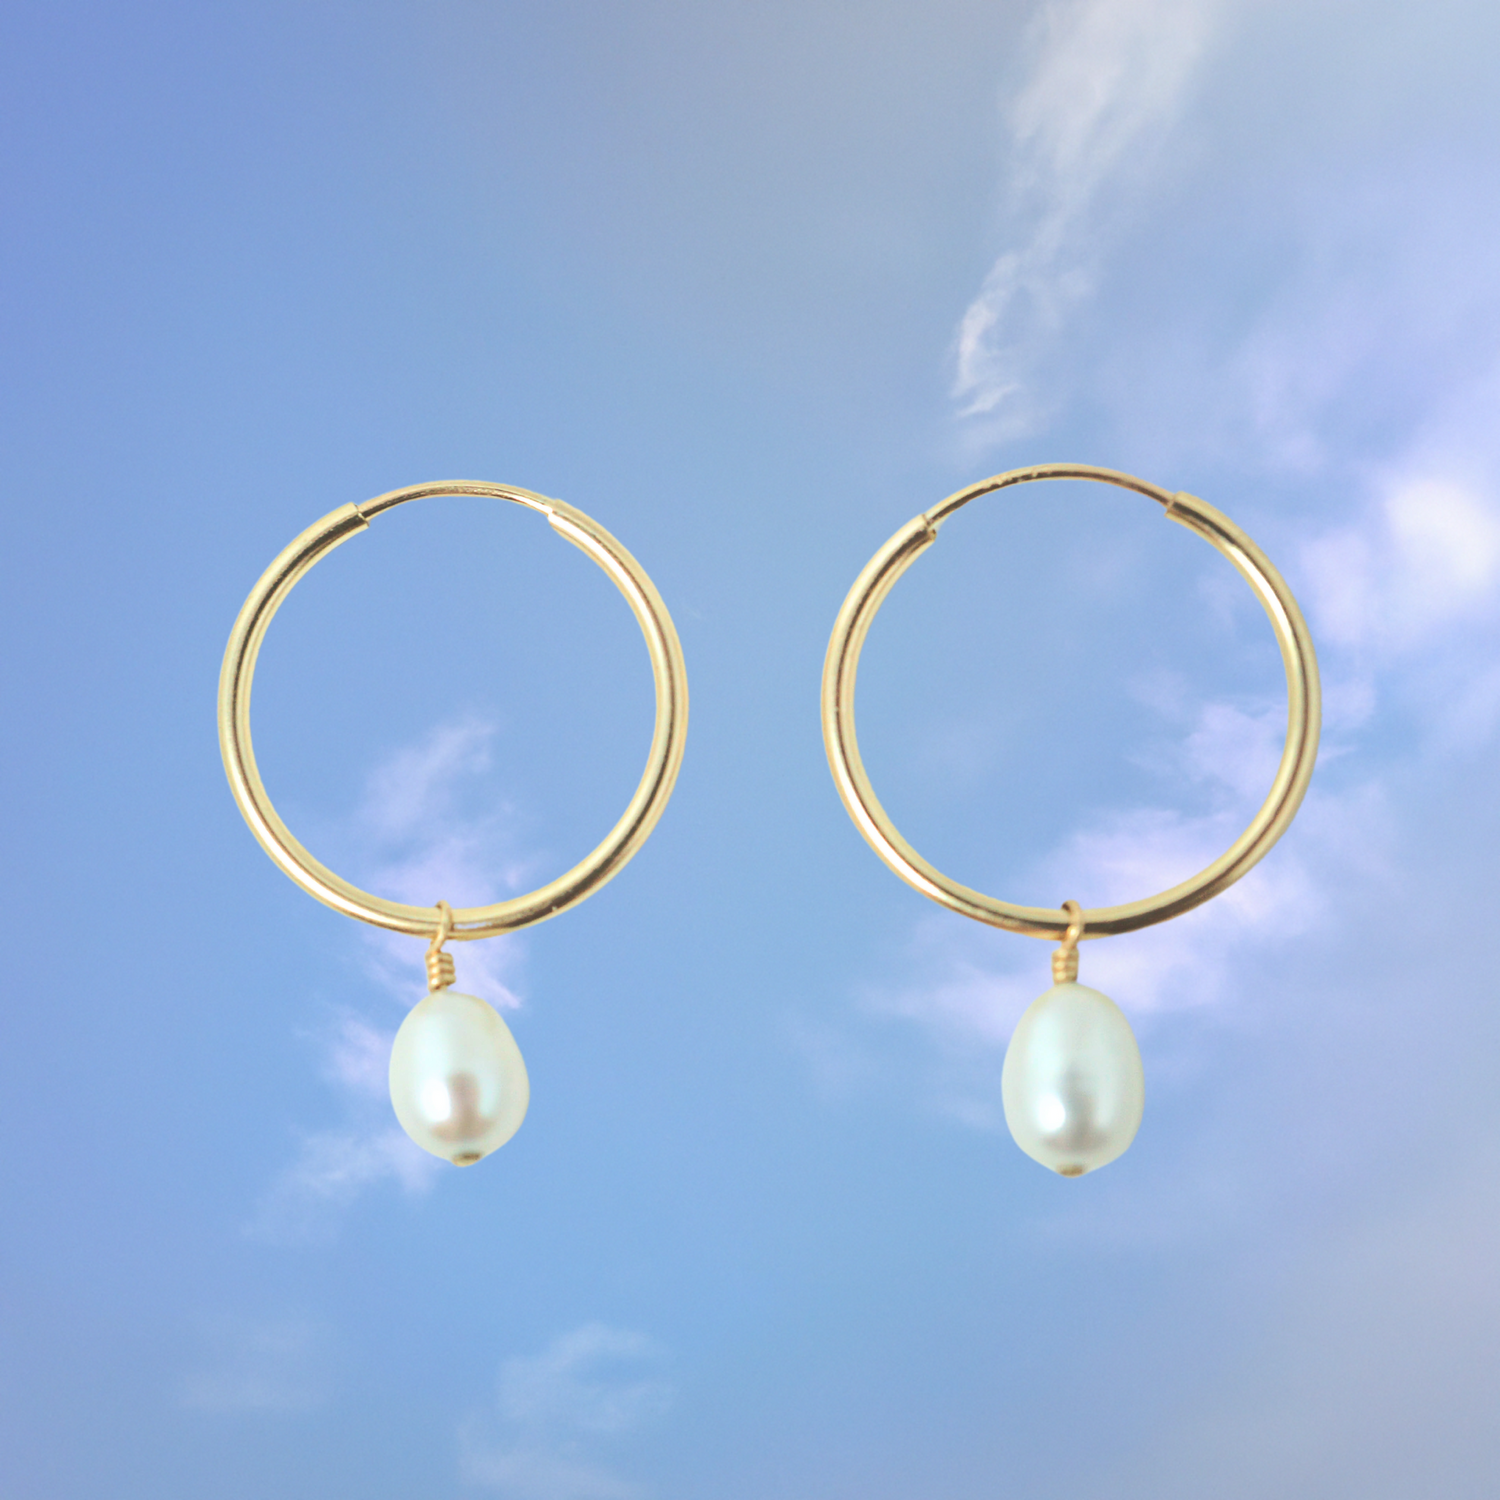 Dainty Pearl Drop Hoops by Quinney Collection 14k Gold Filled jewelry. Made in Victoria BC Canada.